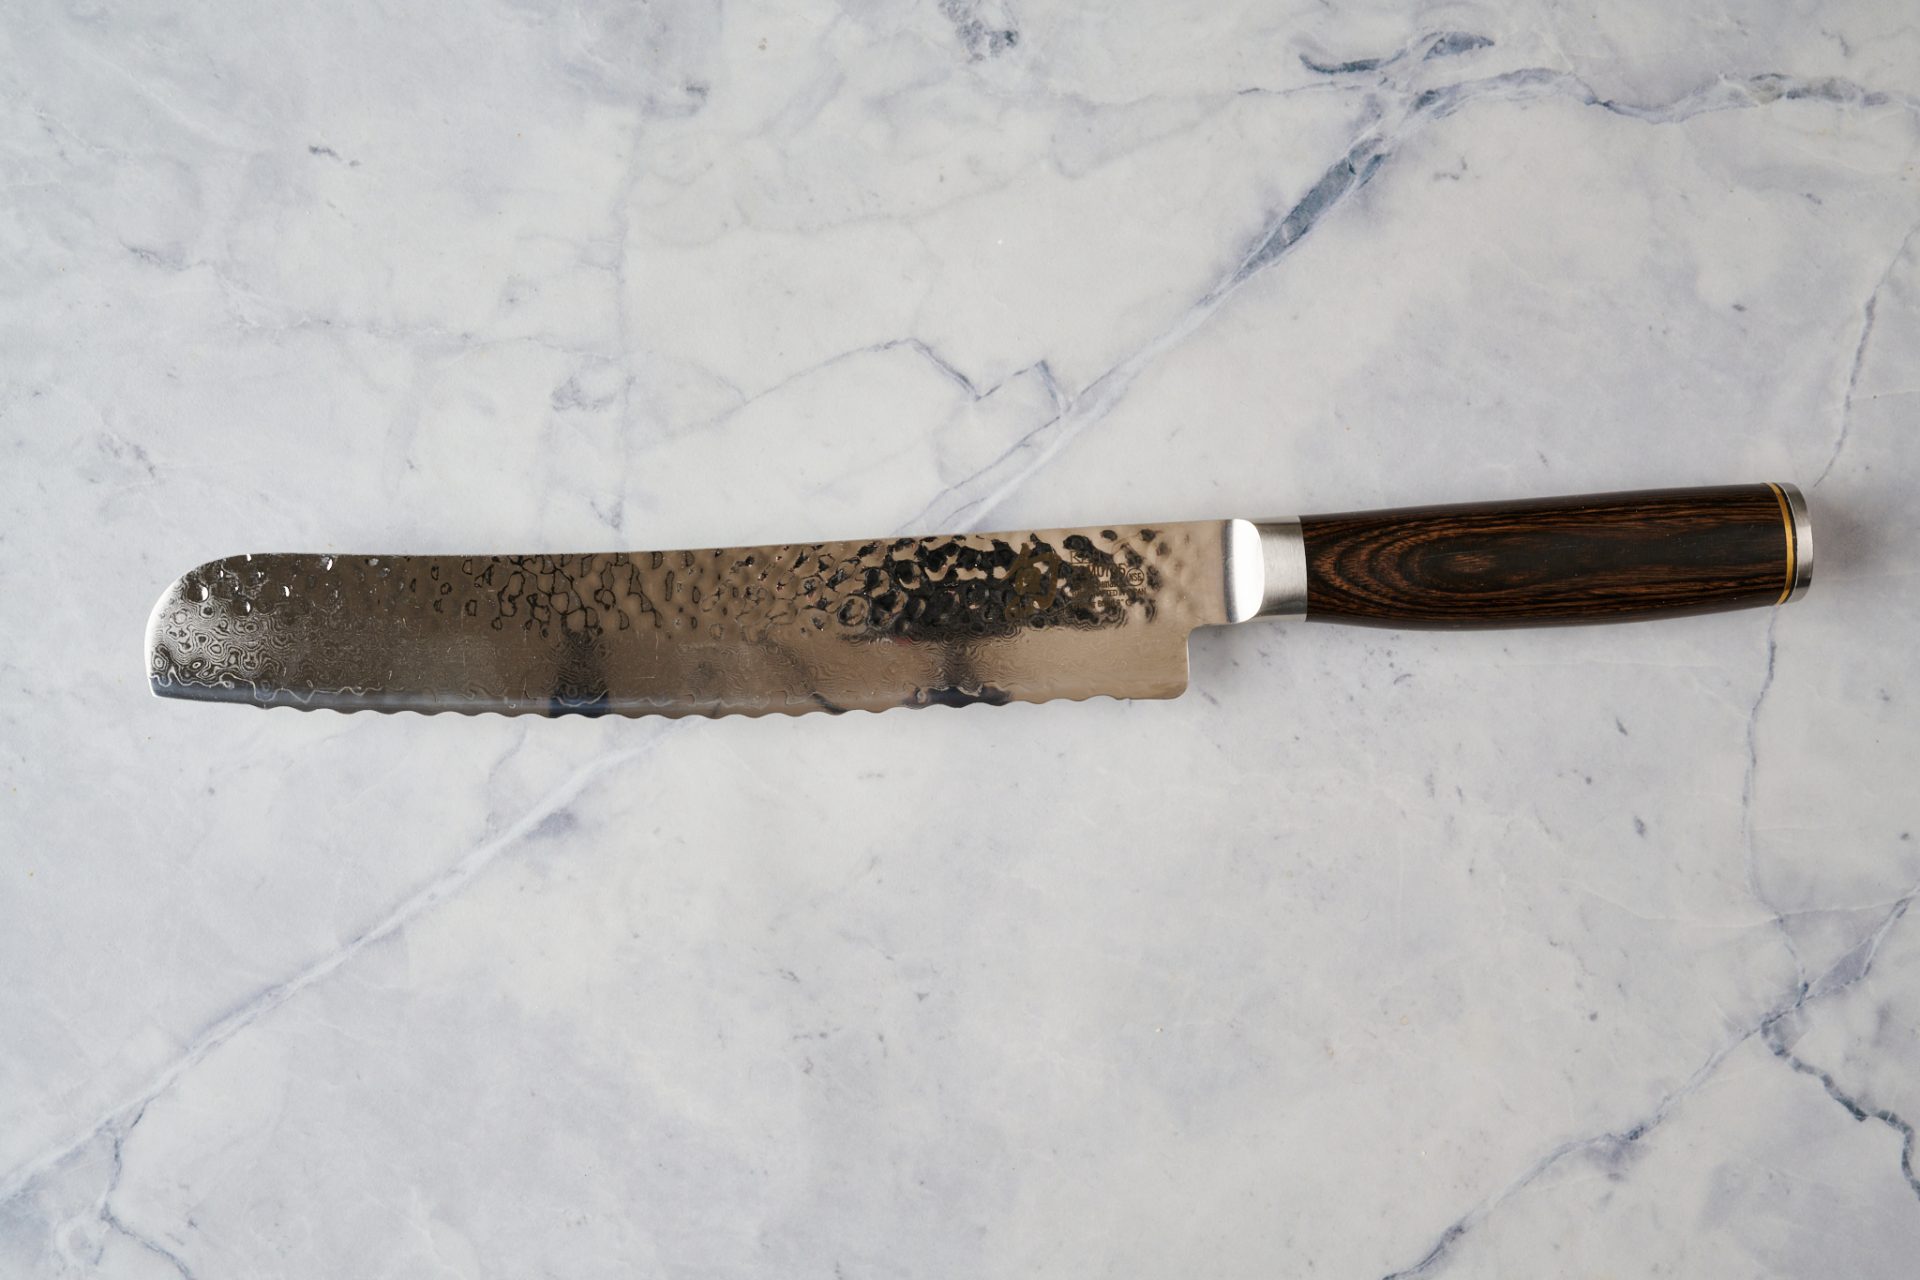 Shun Premier Bread Knife with serrated blade and full tang construction